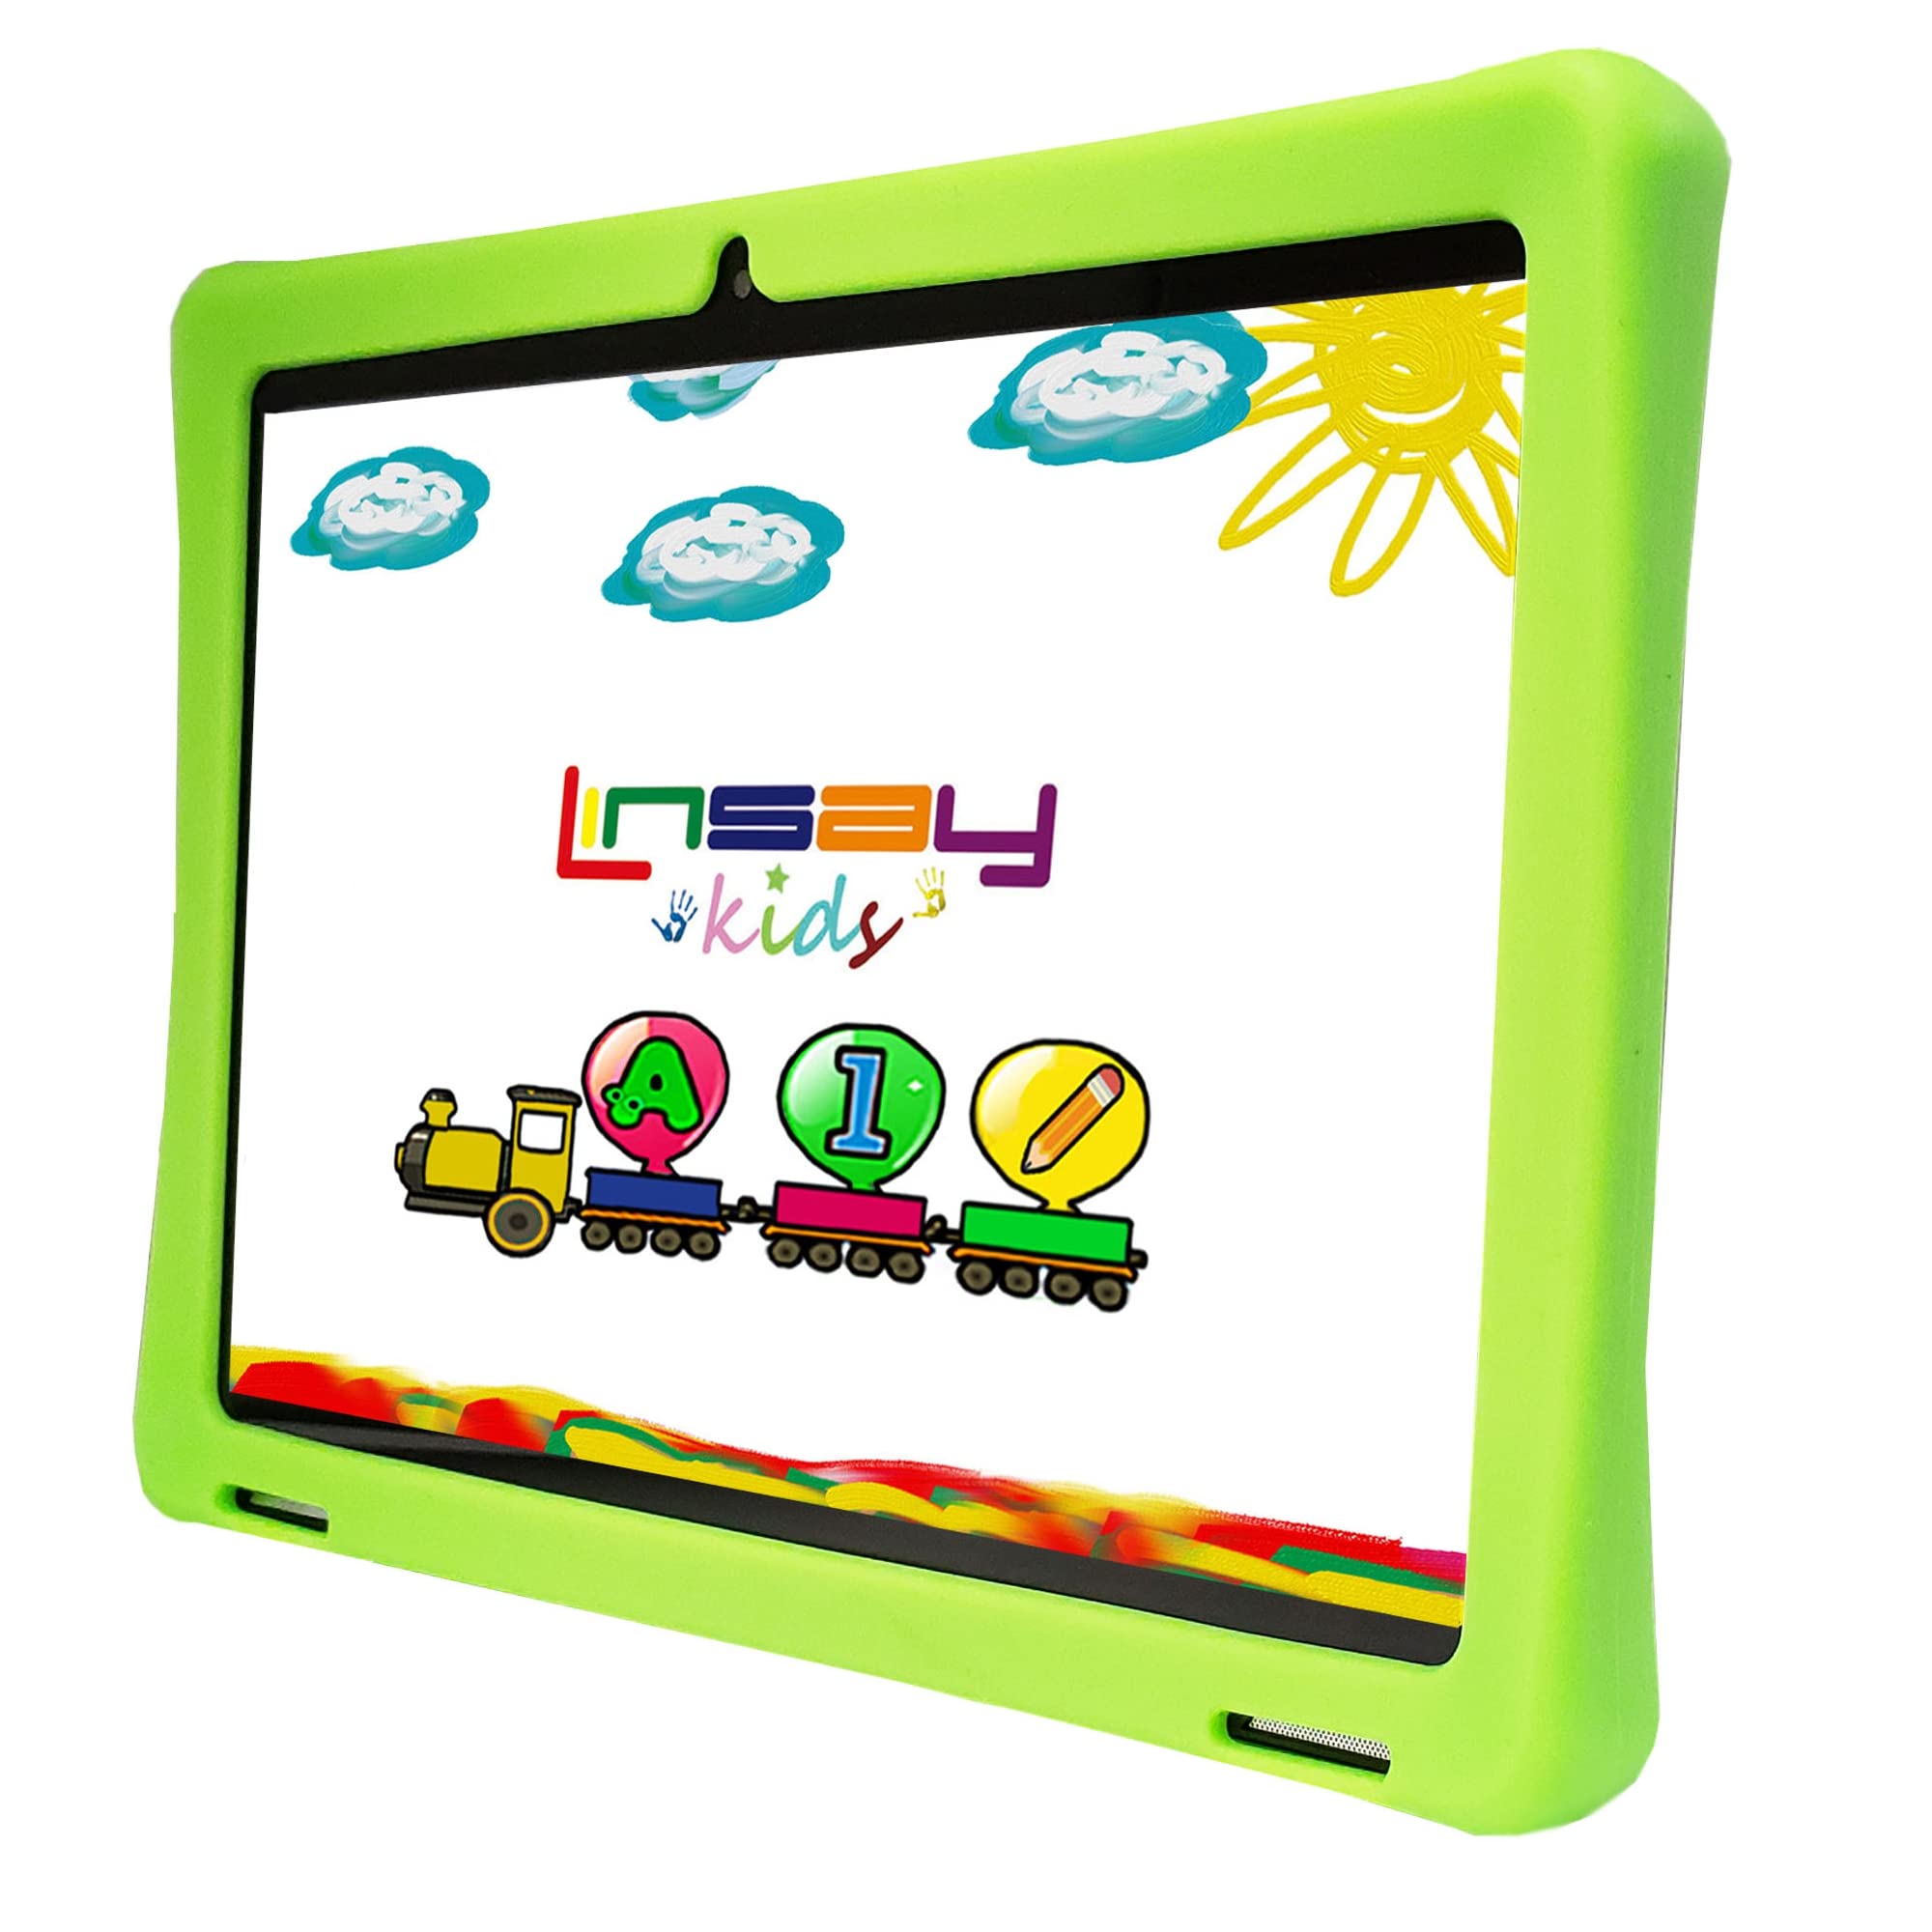 LINSAY 10.1" 1280x800 IPS 2GB RAM 32GB Android 11 Tablet with Kids Green Defender Case, Pop Holder and Pen Stylus